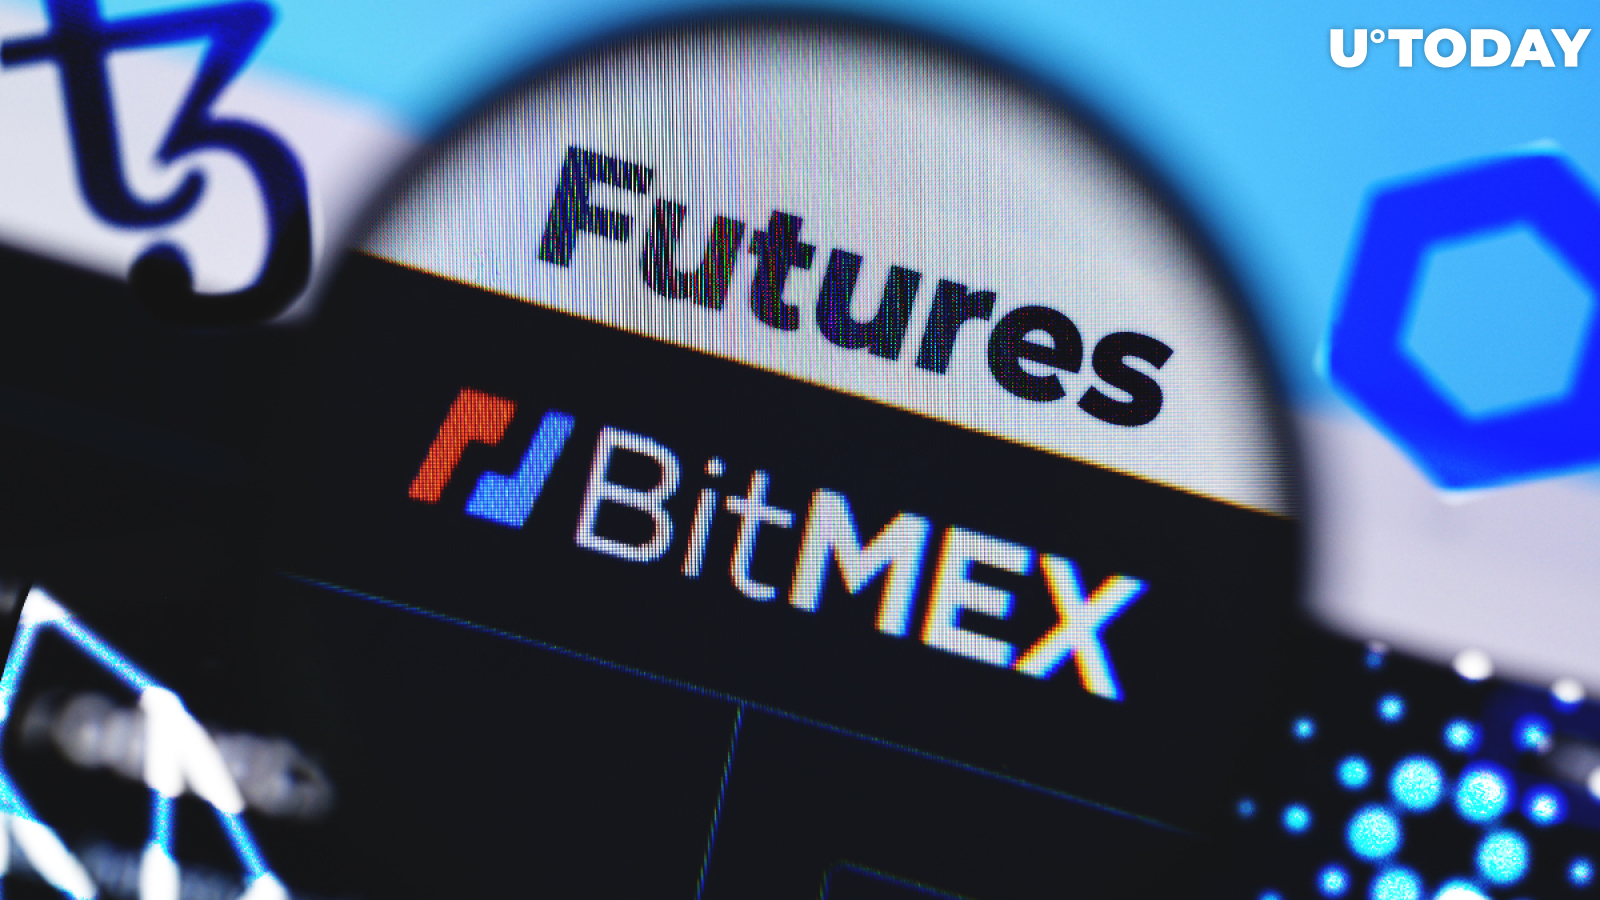 BitMEX Launching Futures for Chainlink (LINK), EOS (EOS), Tezos (XTZ), and Cardano (ADA)